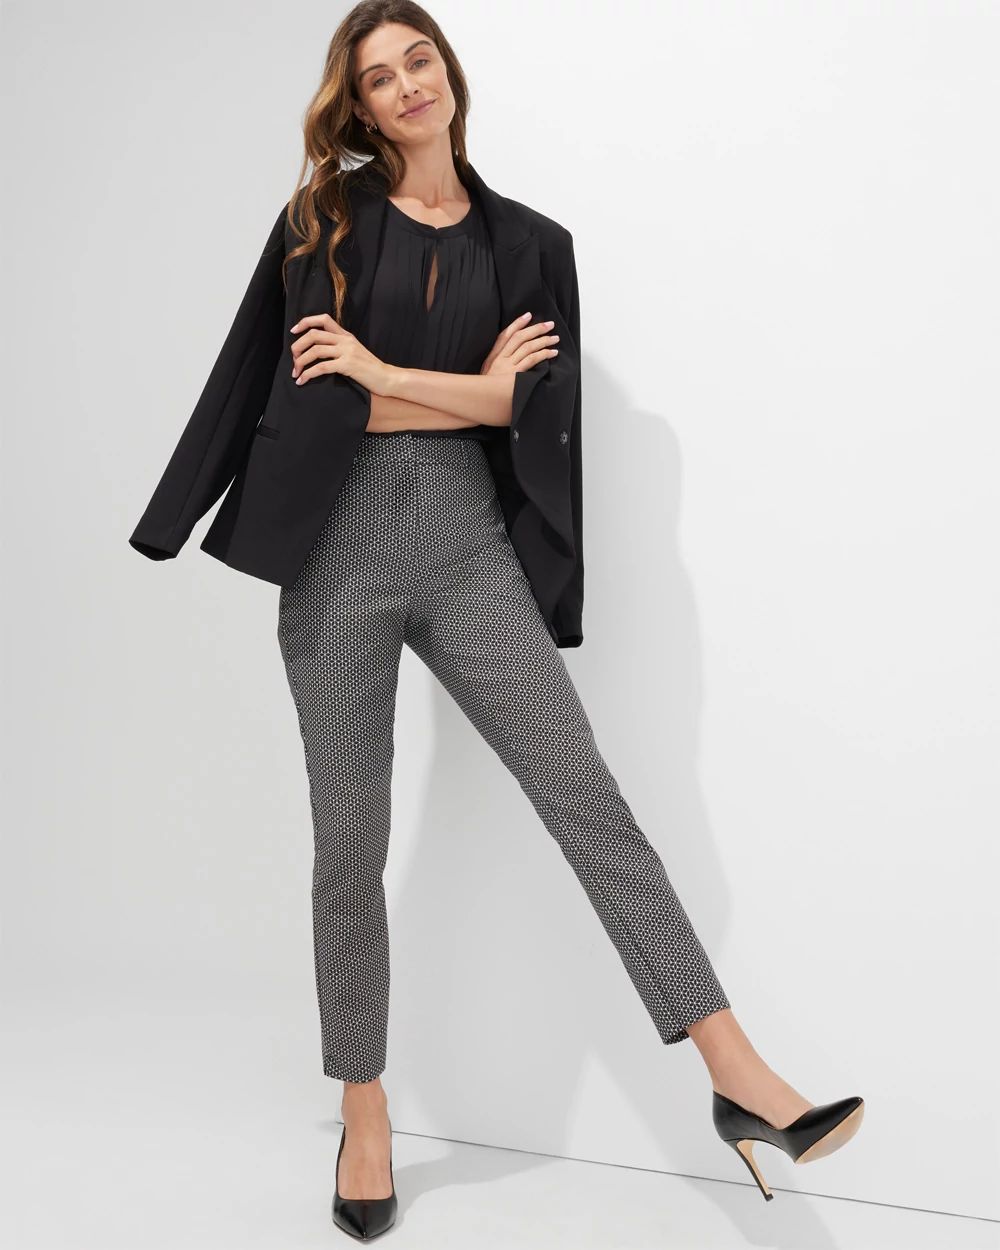 Outlet WHBM The Slim Ankle Pant click to view larger image.